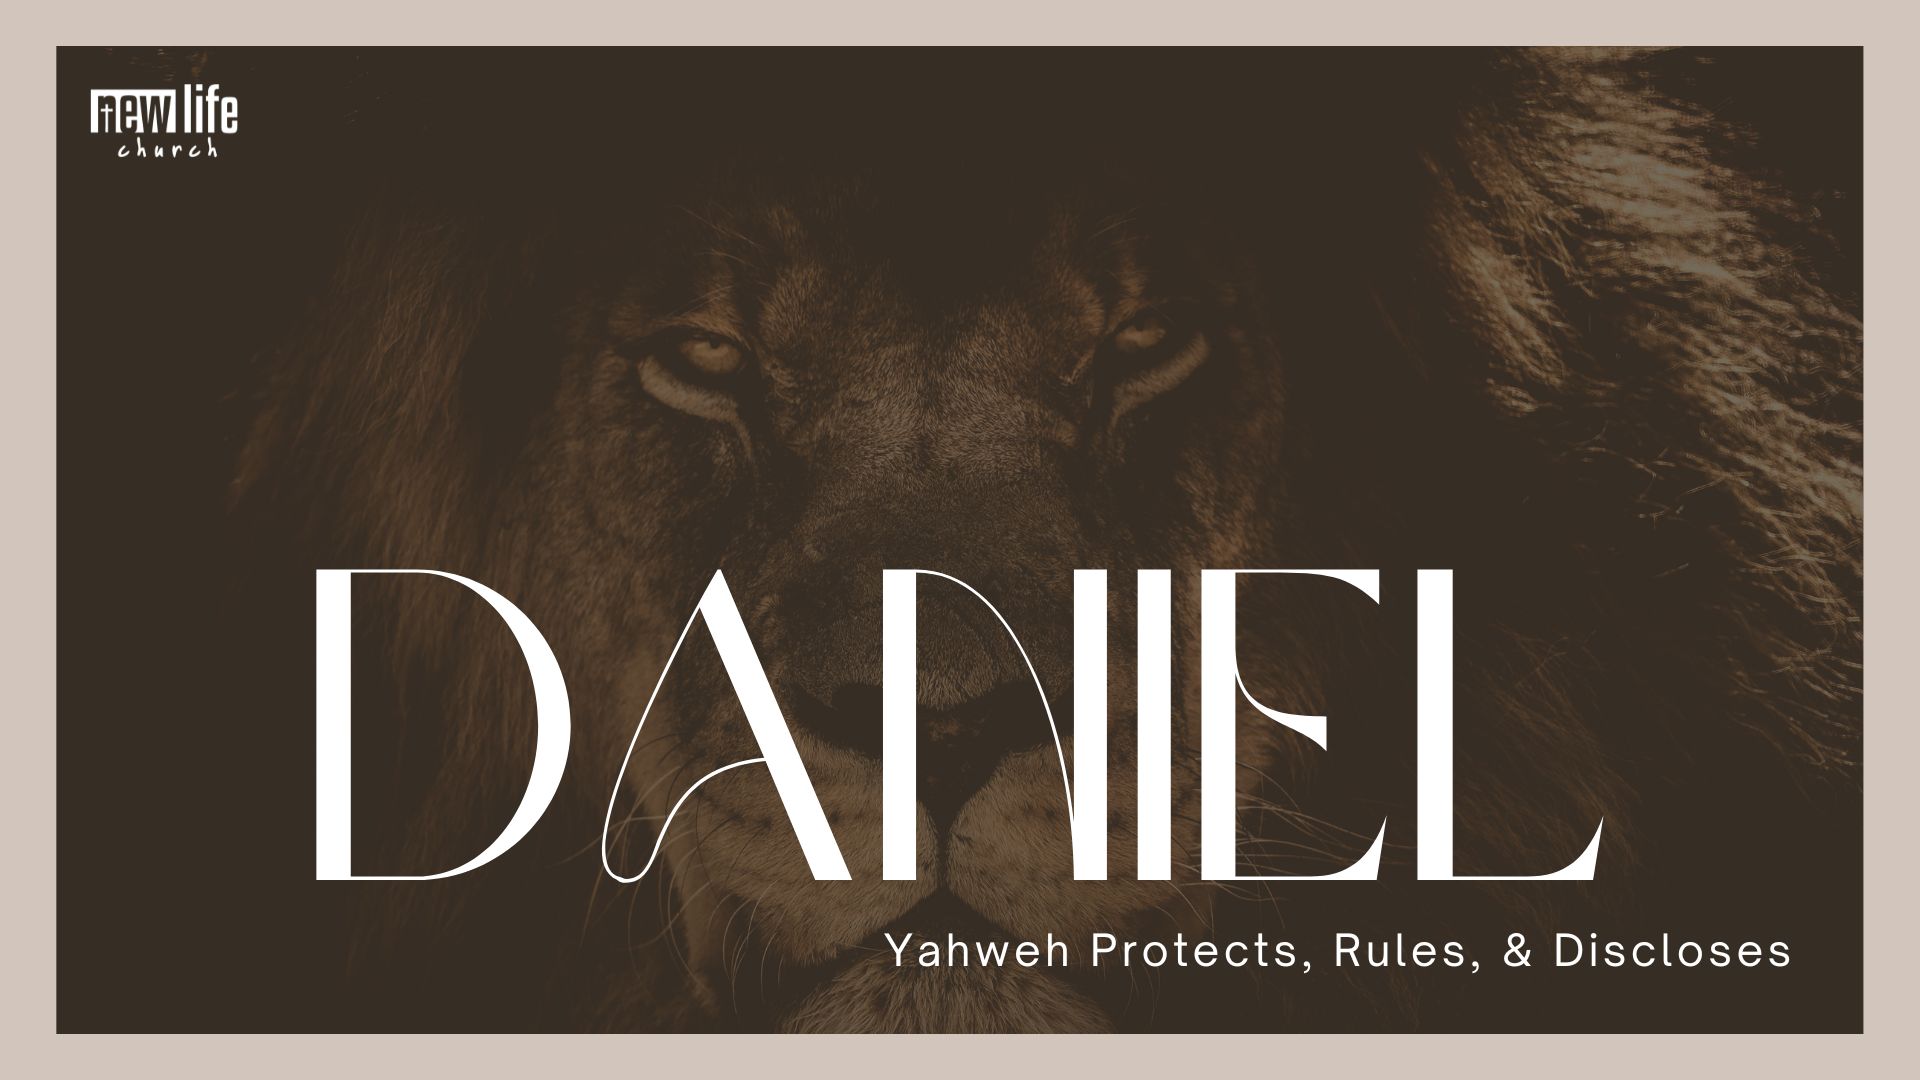 Yahweh's Protection